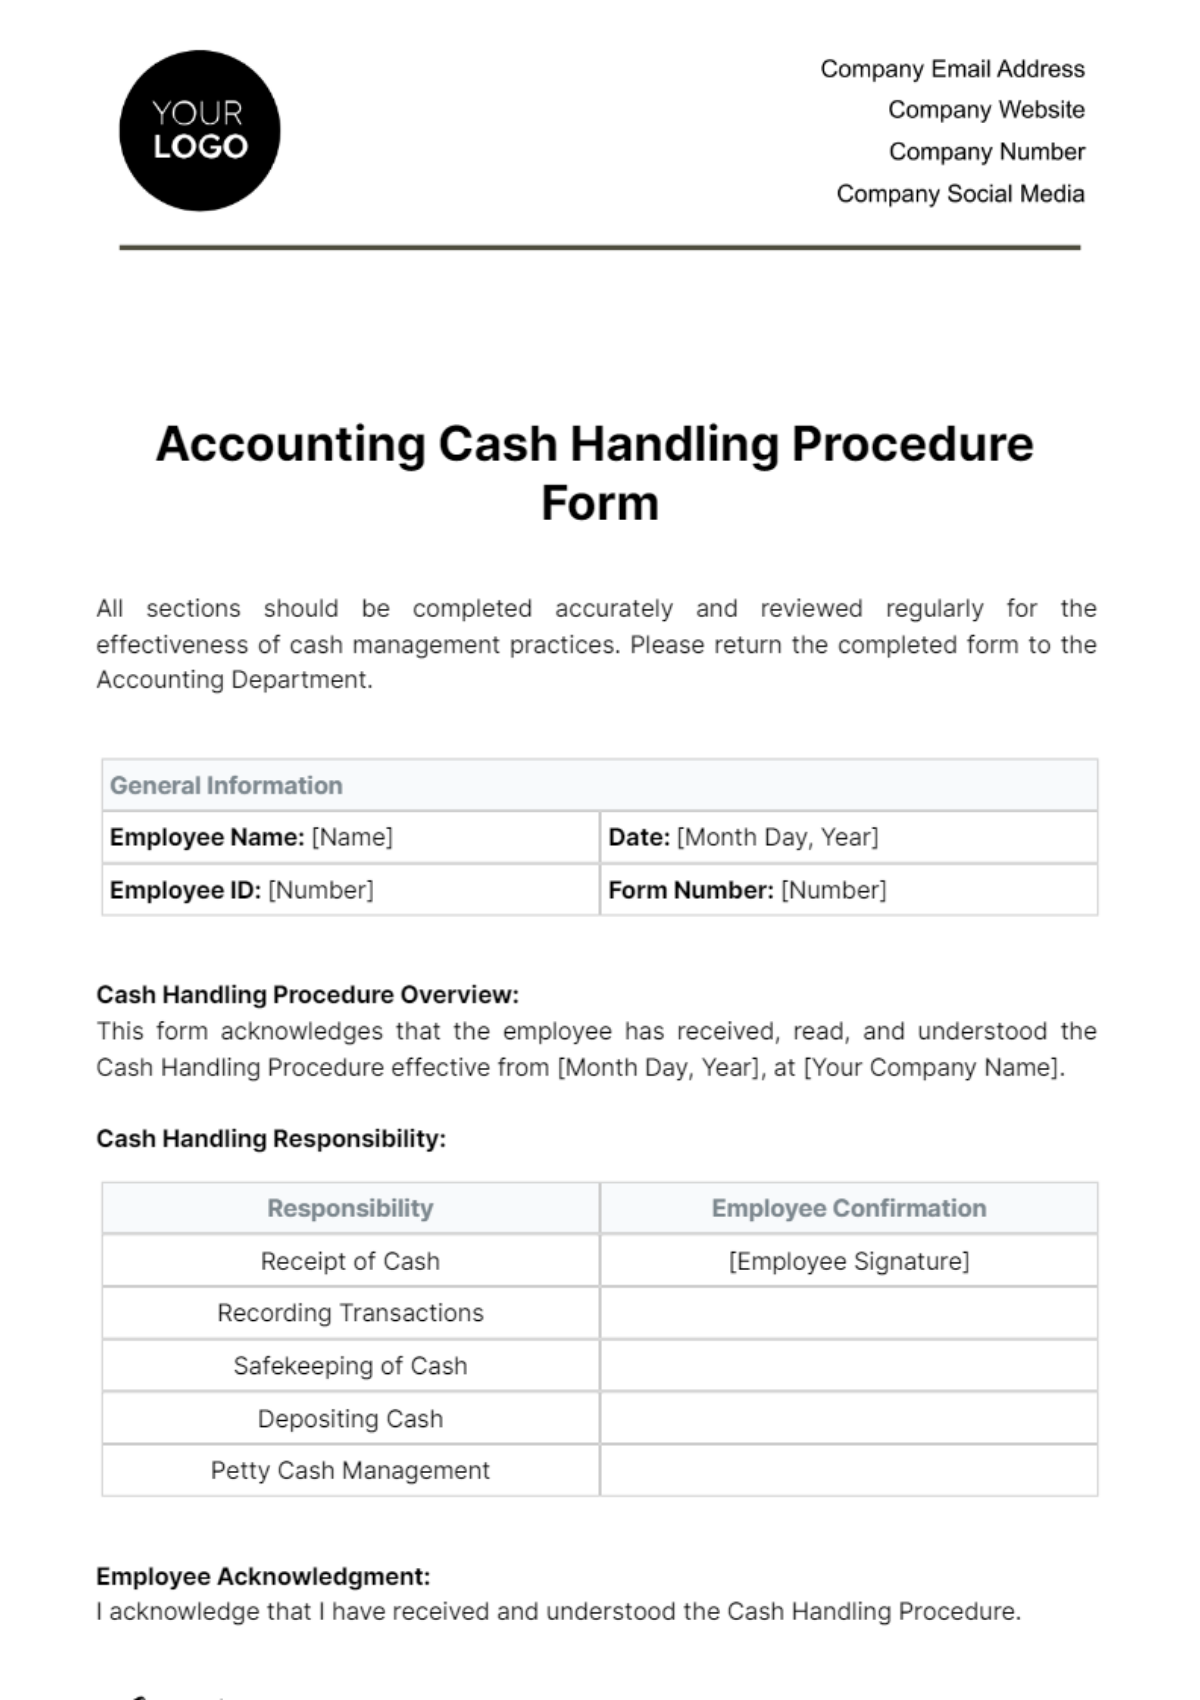 Accounting Cash Handling Procedure Form Template